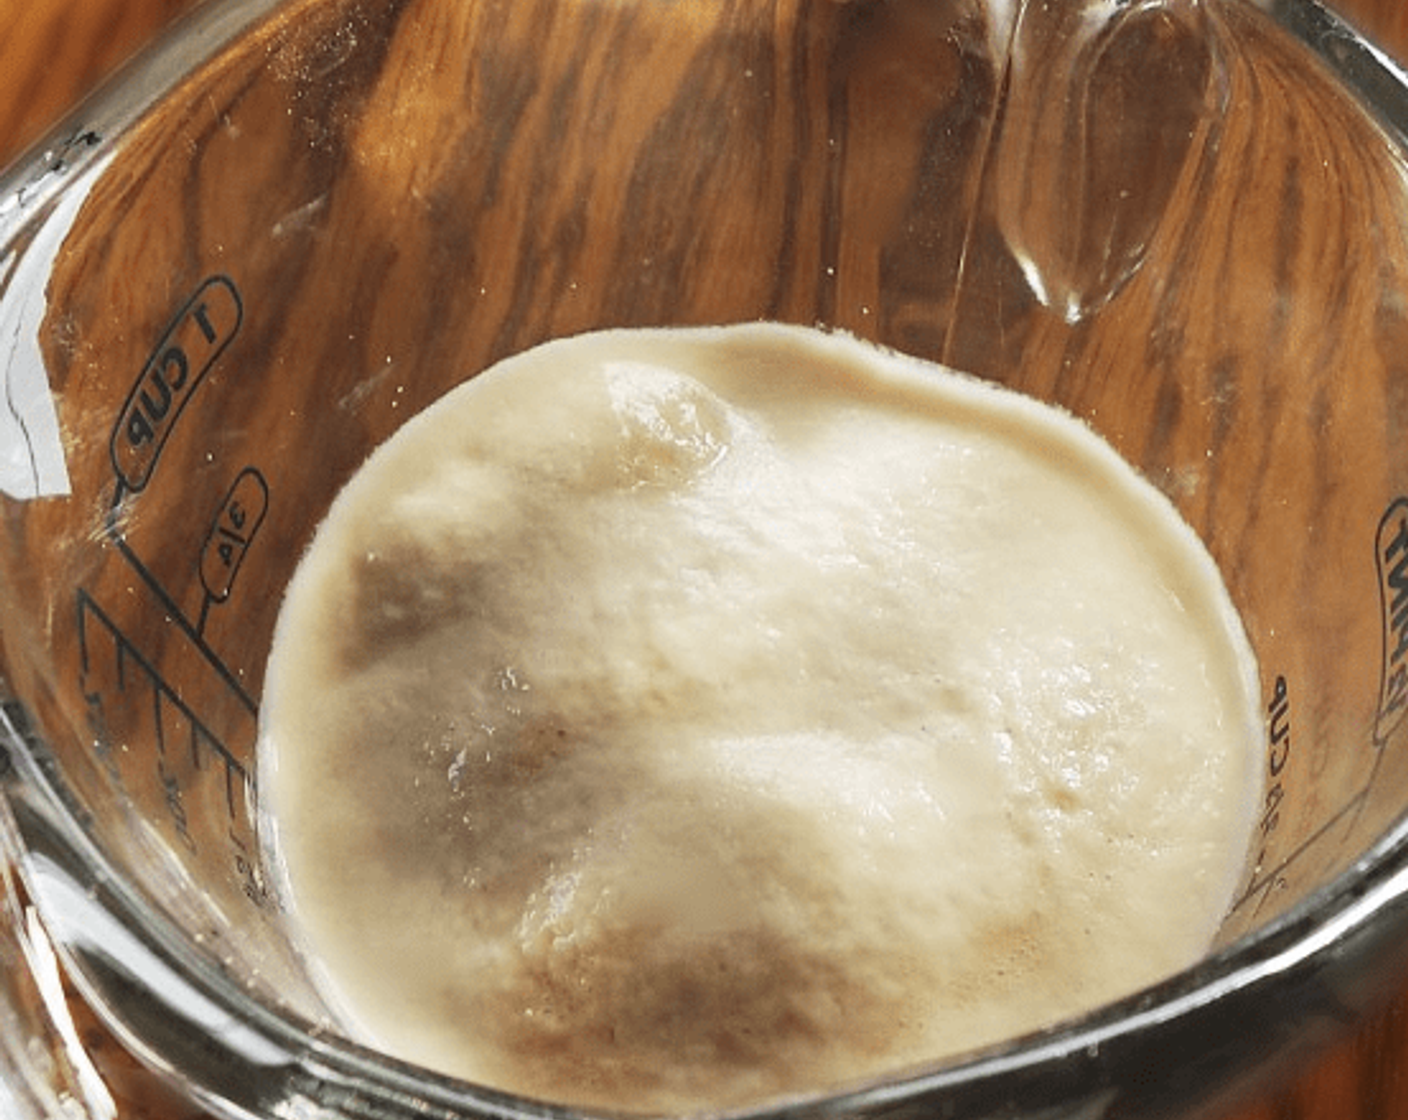 step 1 In Water (1 1/2 cups), pour in the Granulated Sugar (1 1/2 Tbsp) and Active Dry Yeast (1/2 Tbsp). Do not stir. Let it sit for 5 minutes, and then stir the yeast and sugar mixture, until it all dissolves in the water.